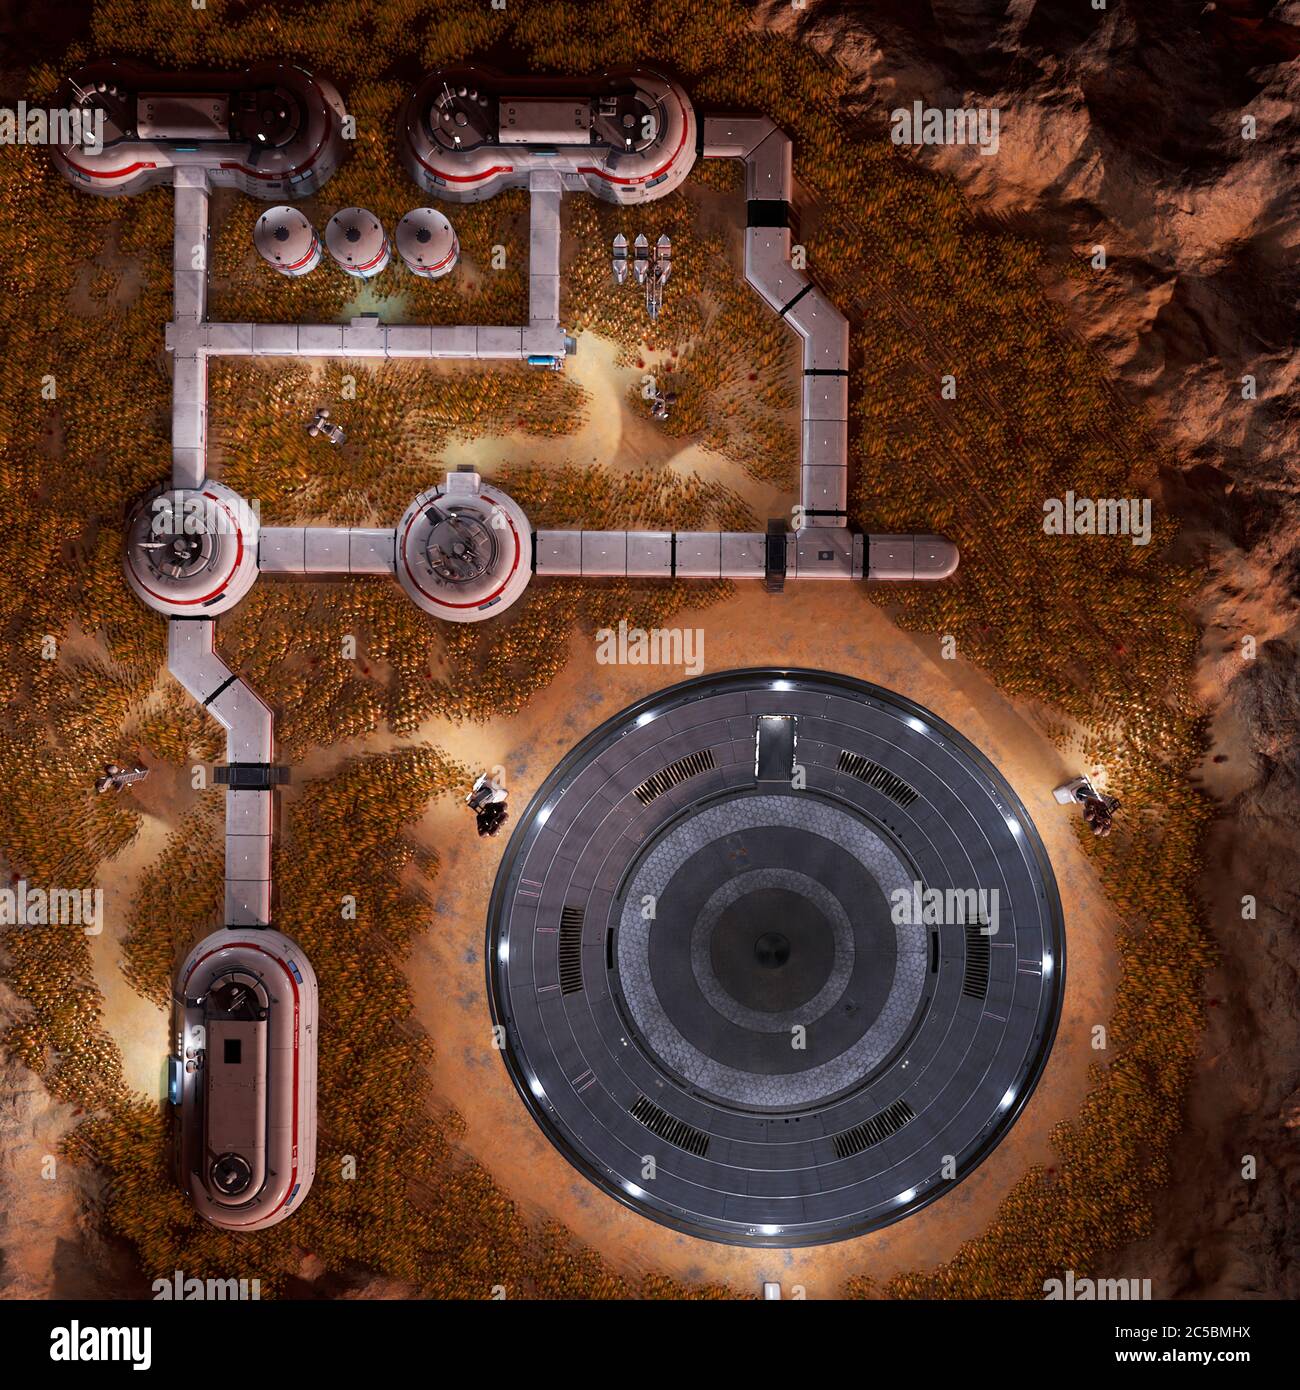 base in another planet drone view, 3d illustration Stock Photo - Alamy